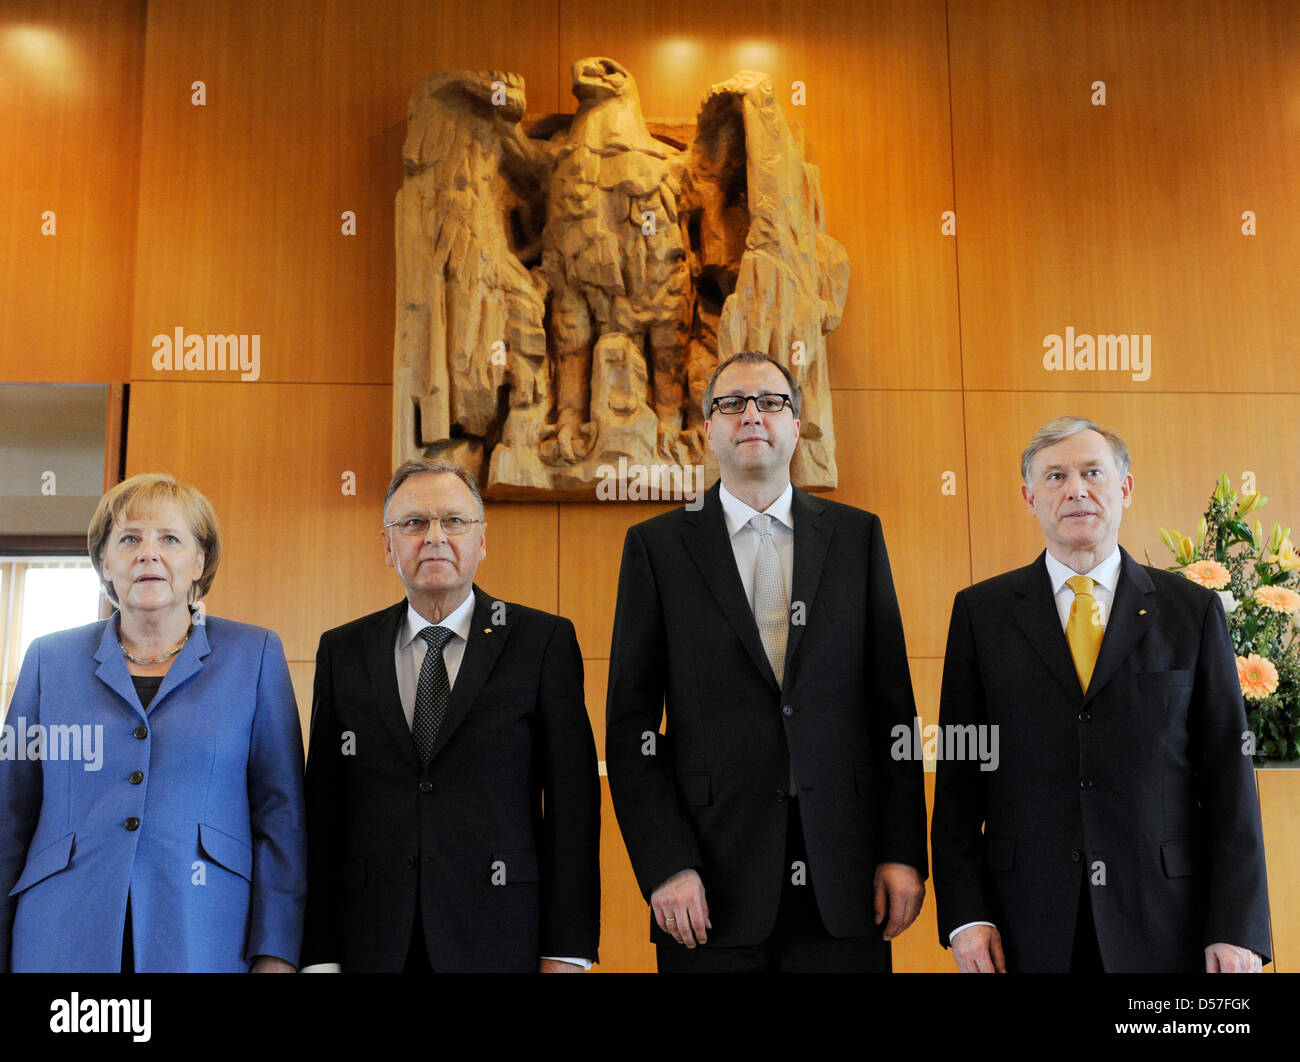 German Chancellor Angela Merkel (L-R), Hans-Juergen Papier, former President of the Federal Constitutional Court of Germany (Bundesverfassungsgericht - BVerfG), Papier's successor Andreas Vosskuhle and Horst Koehler, Federal President of Germany, stand in the Federal Constitutional Court in Karlsruhe, Germany, 14 May 2010. Vosskuhle was formally inaugurated in a ceremonial act duri Stock Photo